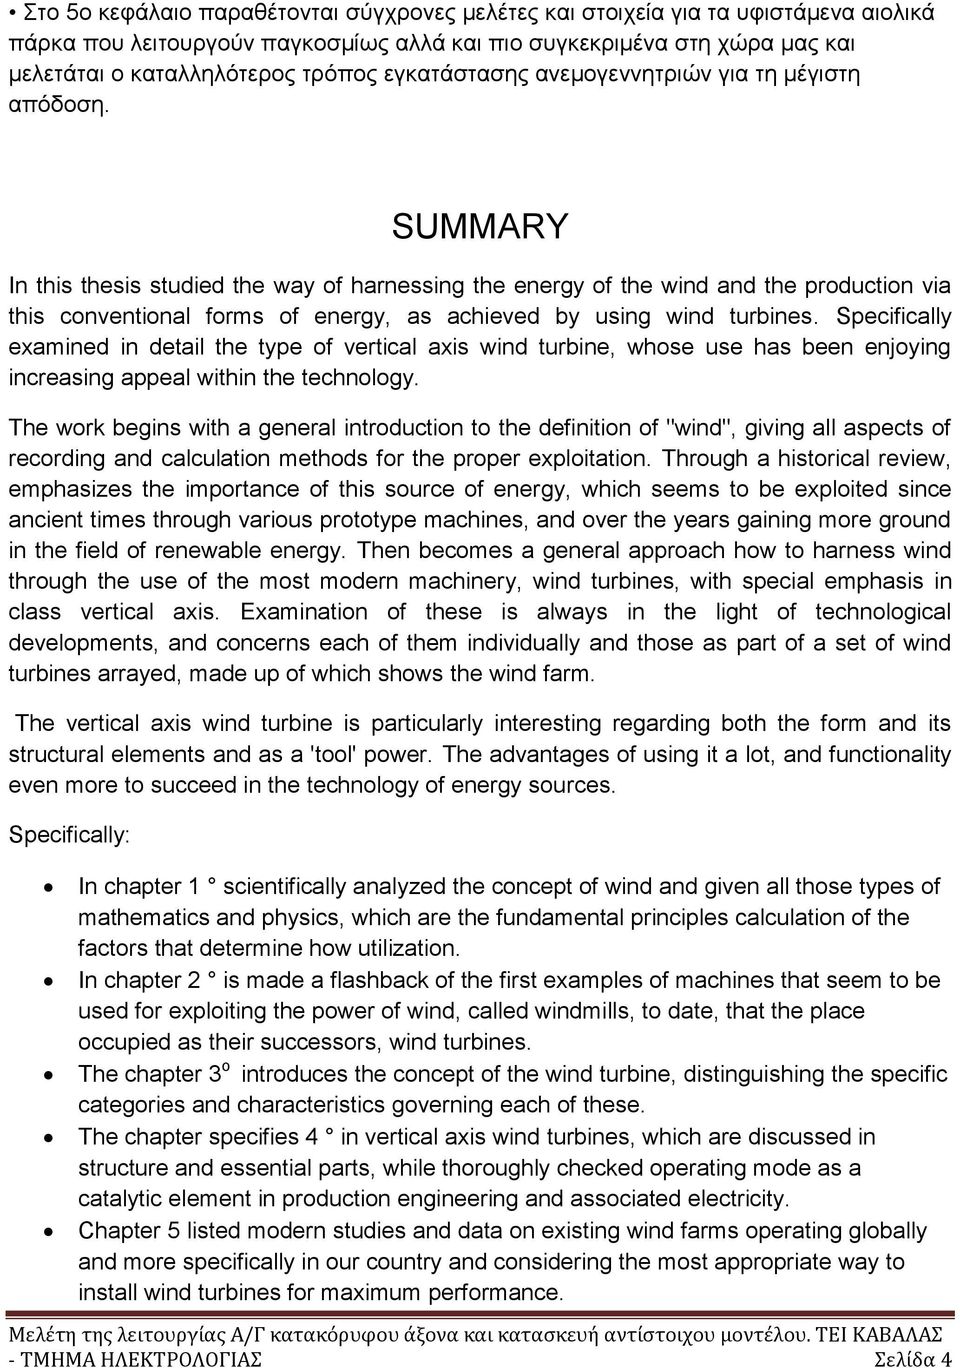 SUMMARY In this thesis studied the way of harnessing the energy of the wind and the production via this conventional forms of energy, as achieved by using wind turbines.